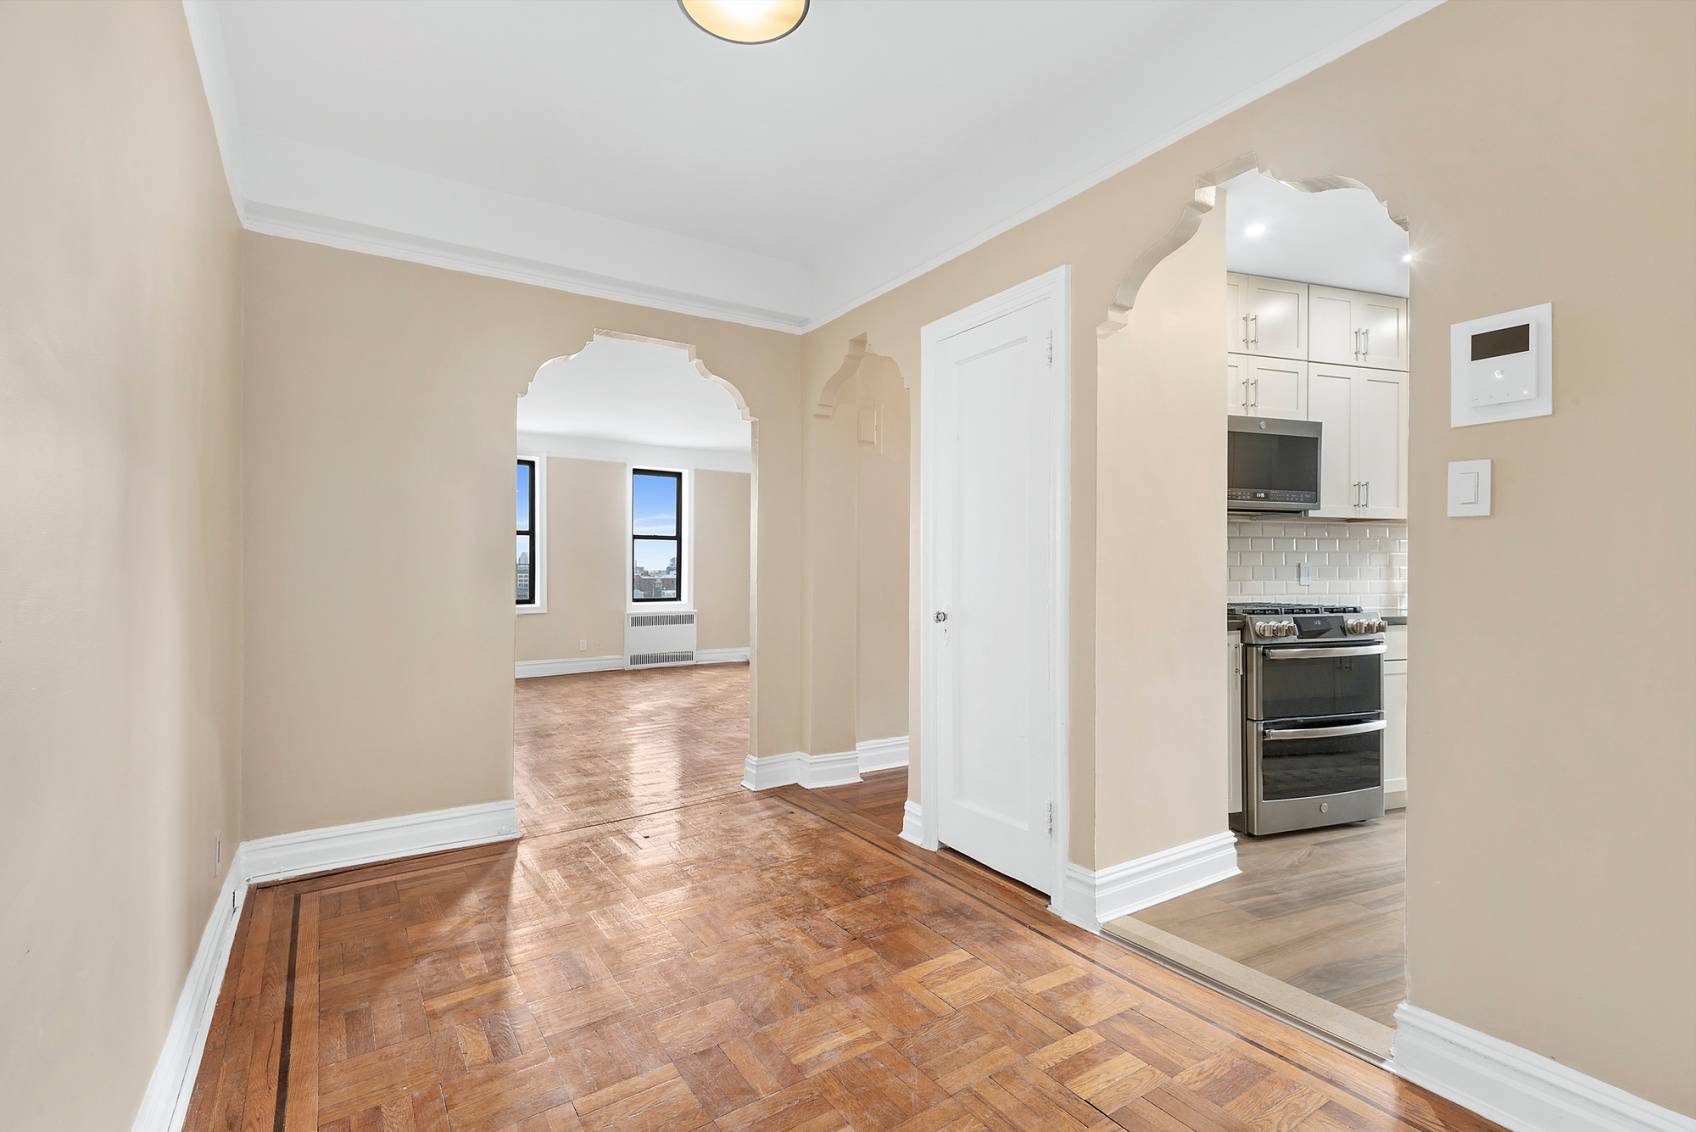 This spacious one bedroom co op has been tastefully renovated while retaining the original arched doorways and beautifully maintained parquet floors that add pre war character and charm to the ...